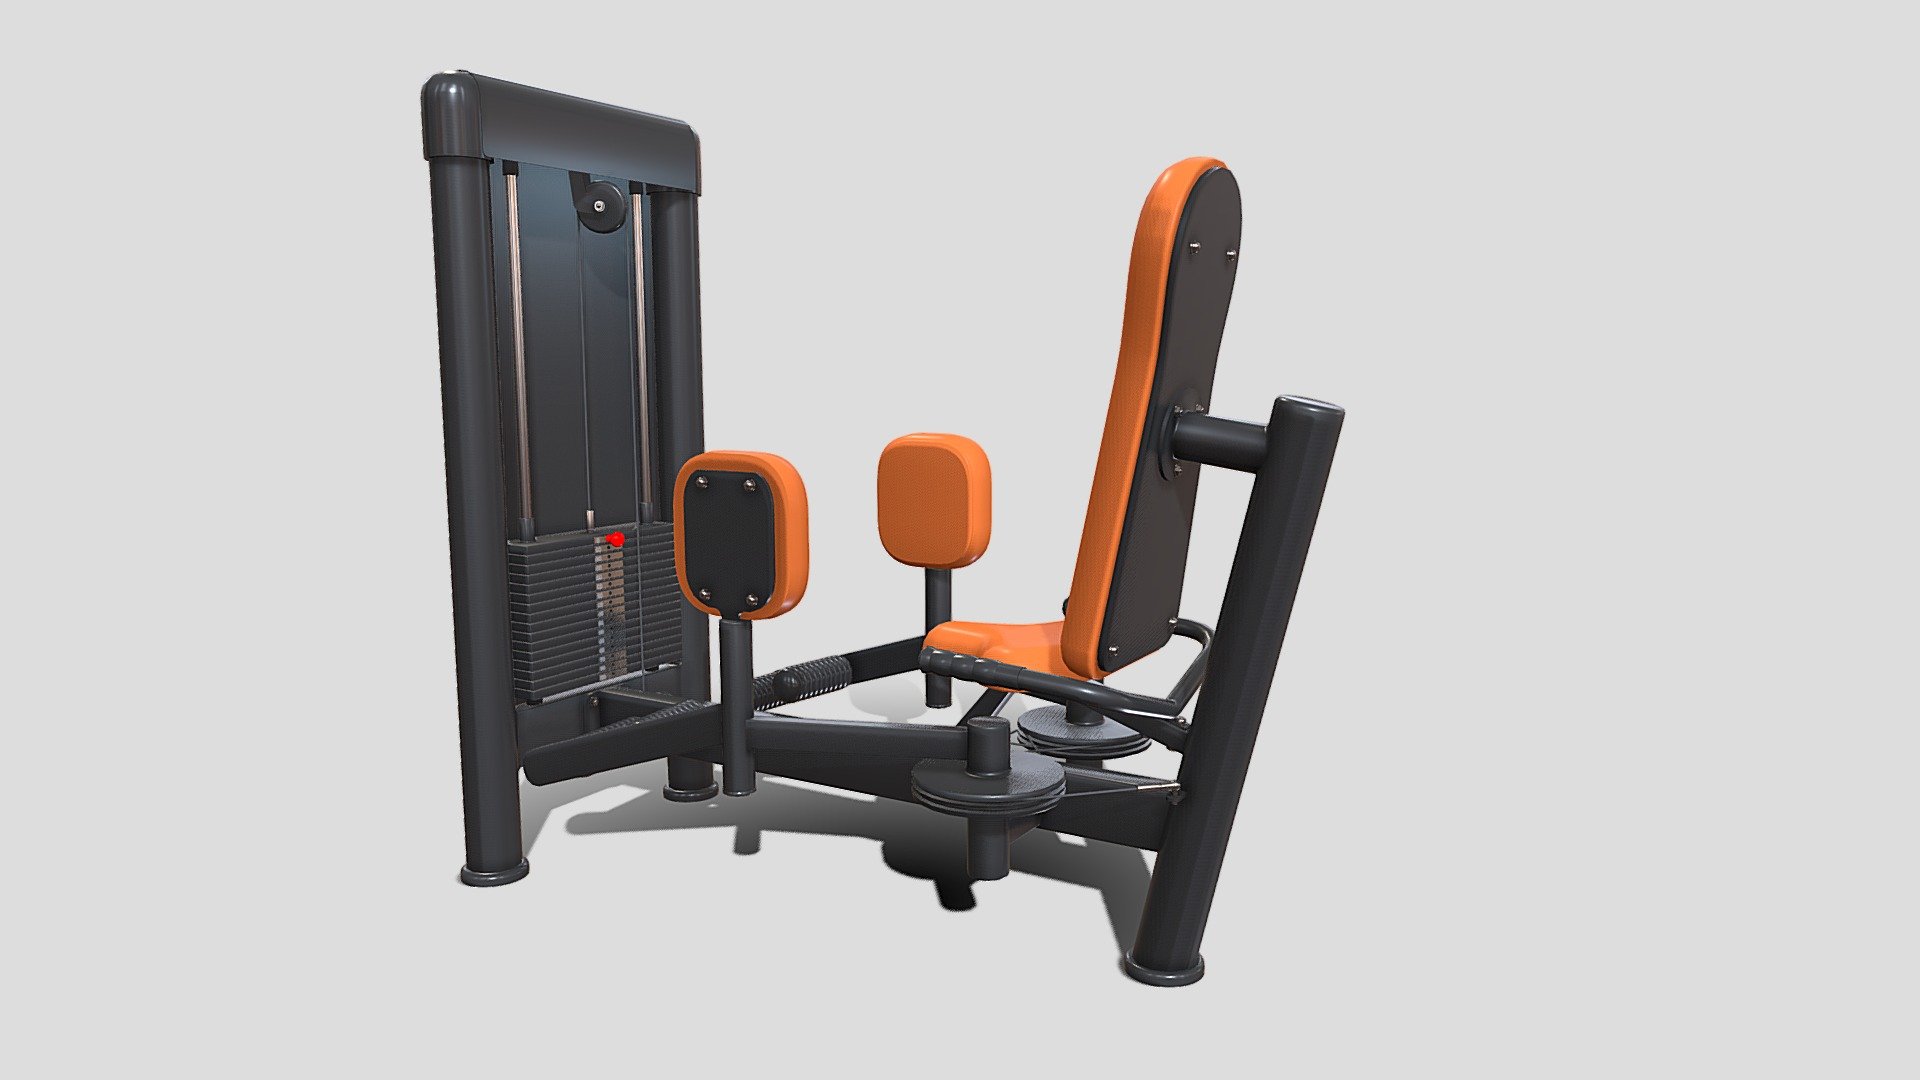 Gym machine 3d model built to real size, rendered with Cycles in Blender, as per seen on attached images. 

File formats:
-.blend, rendered with cycles, as seen in the images;
-.obj, with materials applied;
-.dae, with materials applied;
-.fbx, with materials applied;
-.stl;

Files come named appropriately and split by file format.

3D Software:
The 3D model was originally created in Blender 3.1 and rendered with Cycles.

Materials and textures:
The models have materials applied in all formats, and are ready to import and render.
Materials are image based using PBR, the model comes with four 4k png image textures.

Preview scenes:
The preview images are rendered in Blender using its built-in render engine &lsquo;Cycles'.
Note that the blend files come directly with the rendering scene included and the render command will generate the exact result as seen in previews.

General:
The models are built mostly out of quads.

For any problems please feel free to contact me.

Don't forget to rate and enjoy! - Abductor Machine - Buy Royalty Free 3D model by dragosburian 3d model